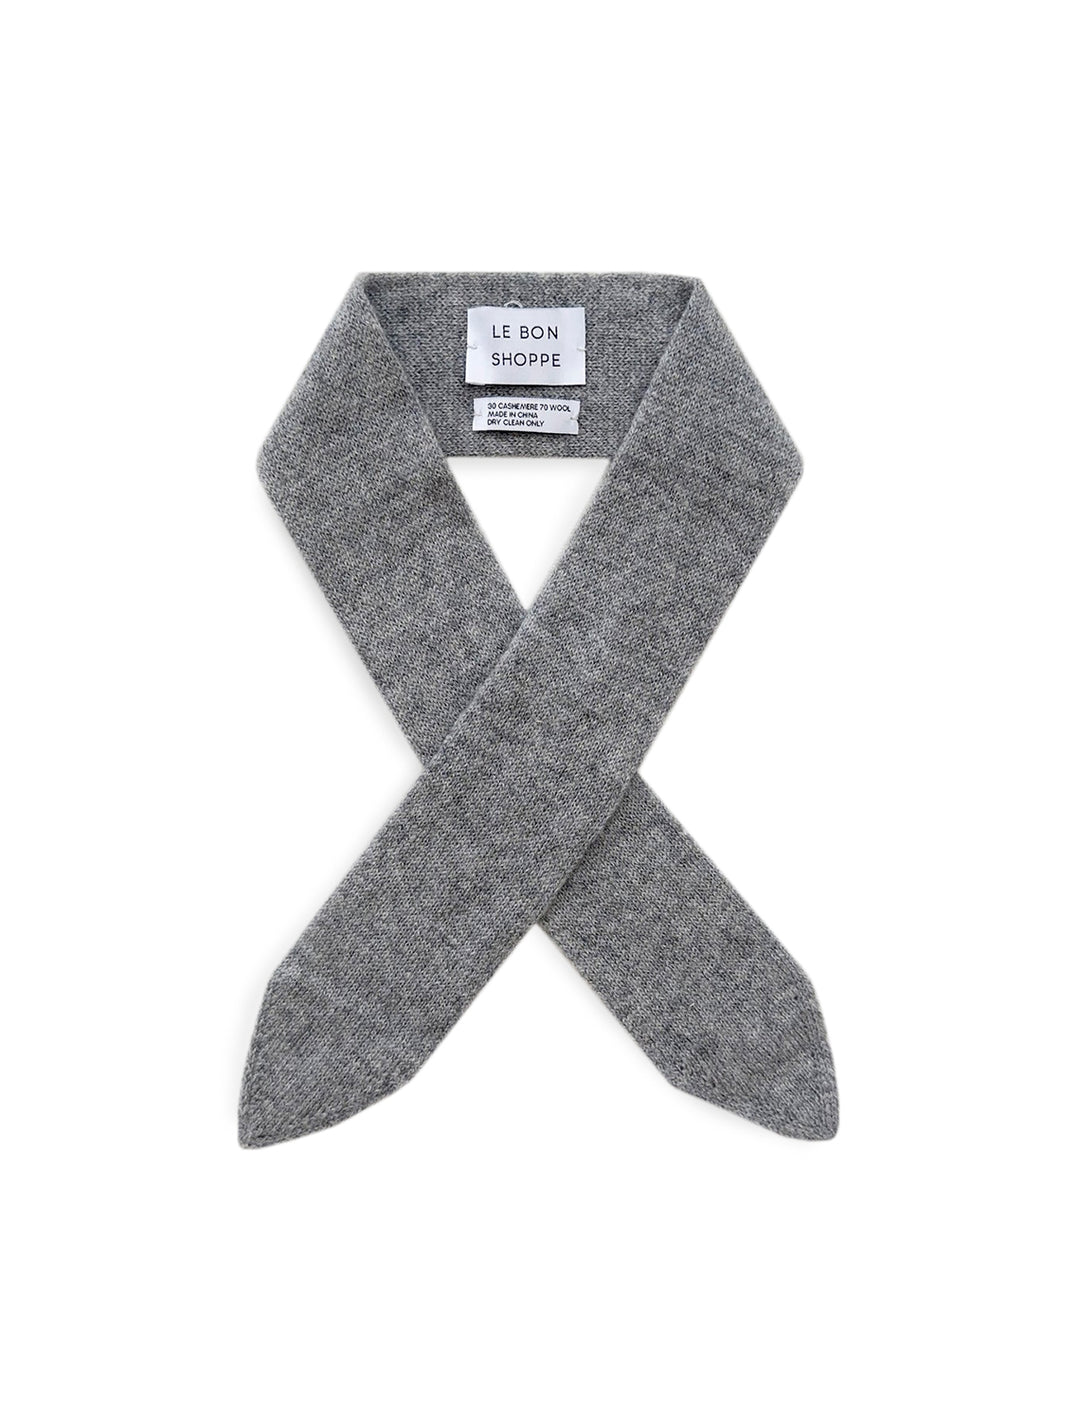 Overhead view of Le Bon Shoppe's classic cashmere skinny scarf in grey.